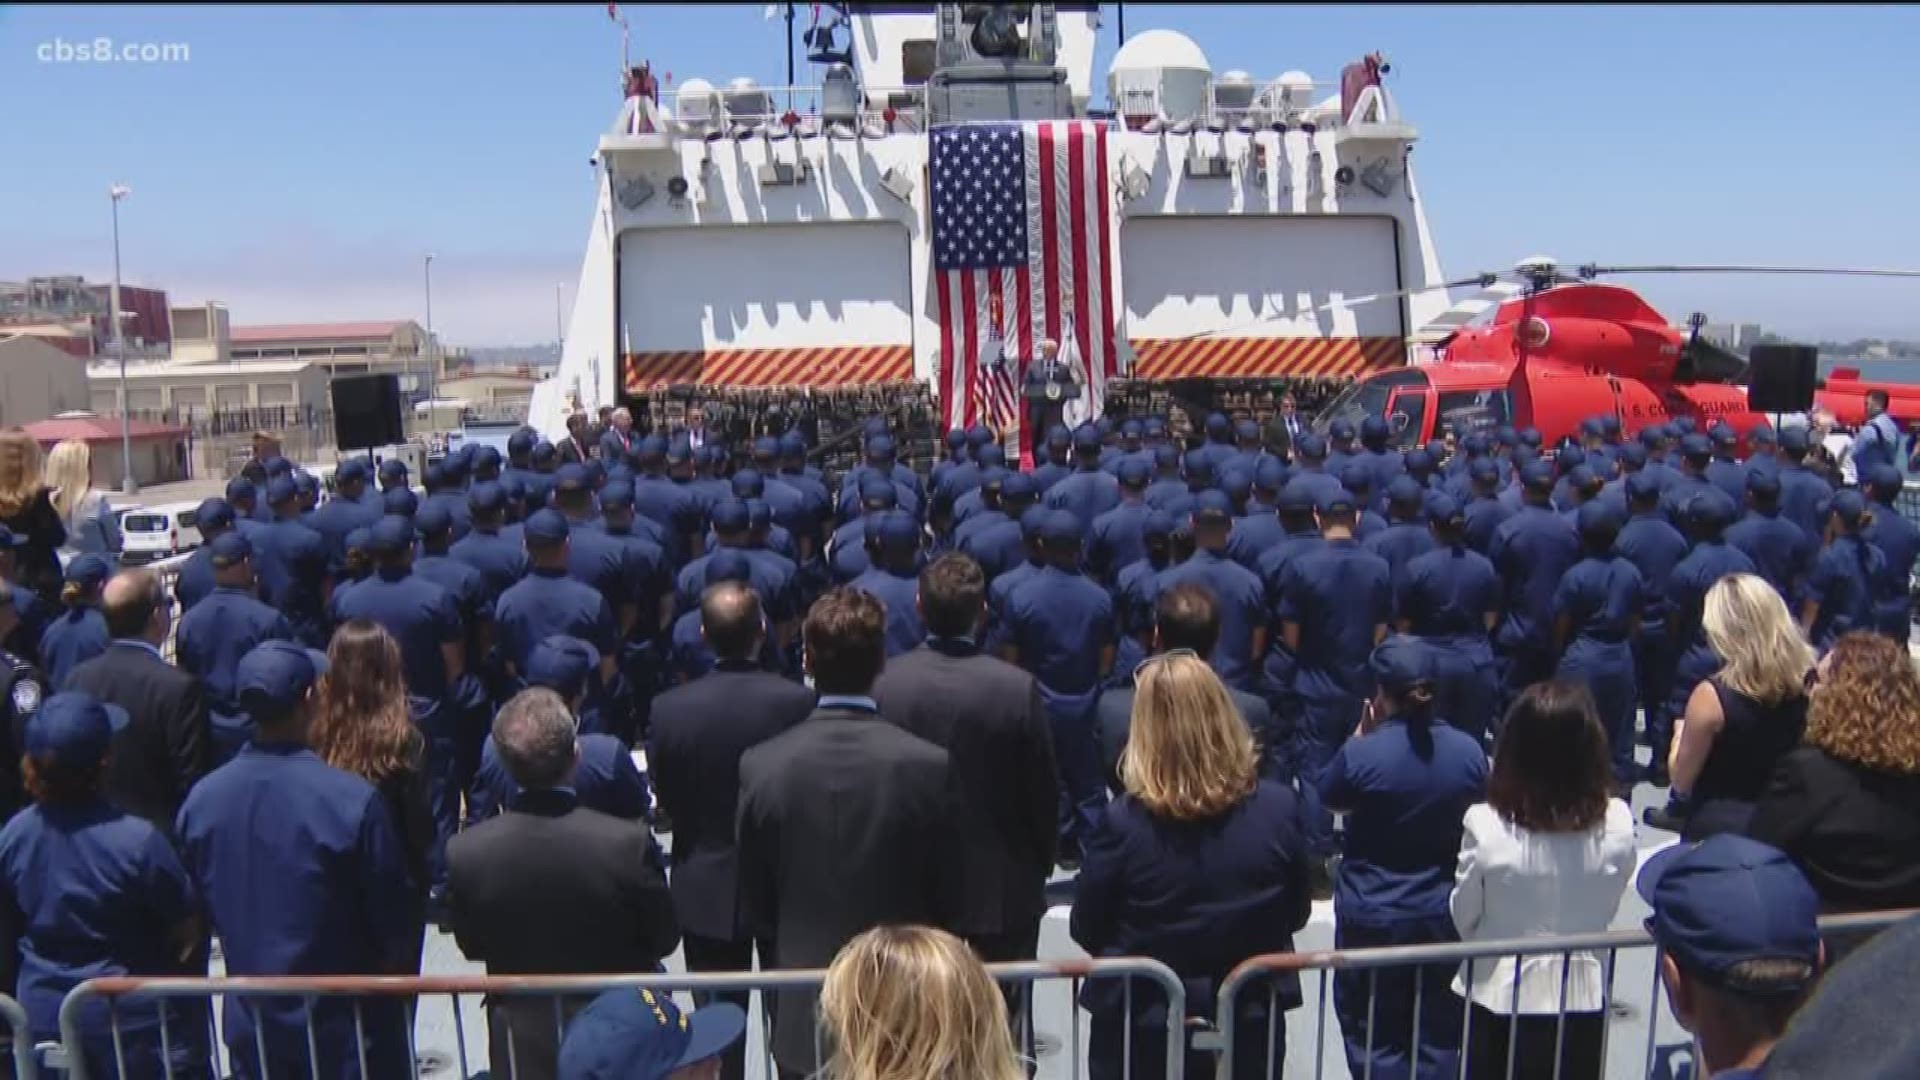 During his stop in San Diego, Pence boarded a Coast Guard cutter and saw 40,000 lbs of drugs that had been seized.